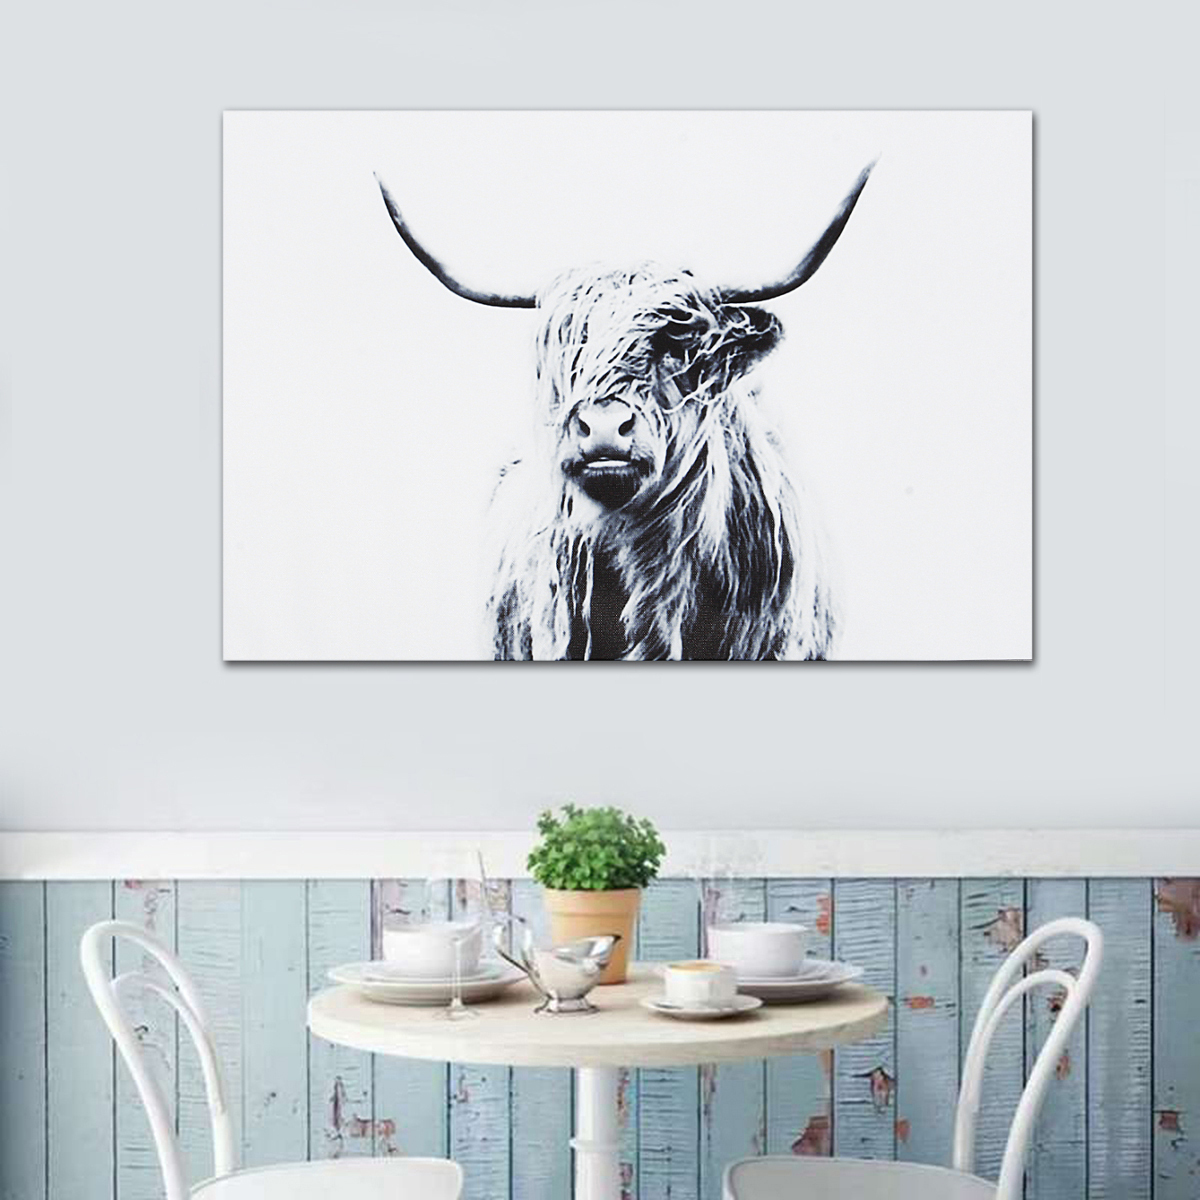 1-Piece-Highland-Cattle-Canvas-Painting-Wall-Decorative-Print-Art-Pictures-Frameless-Wall-Hanging-De-1733254-5